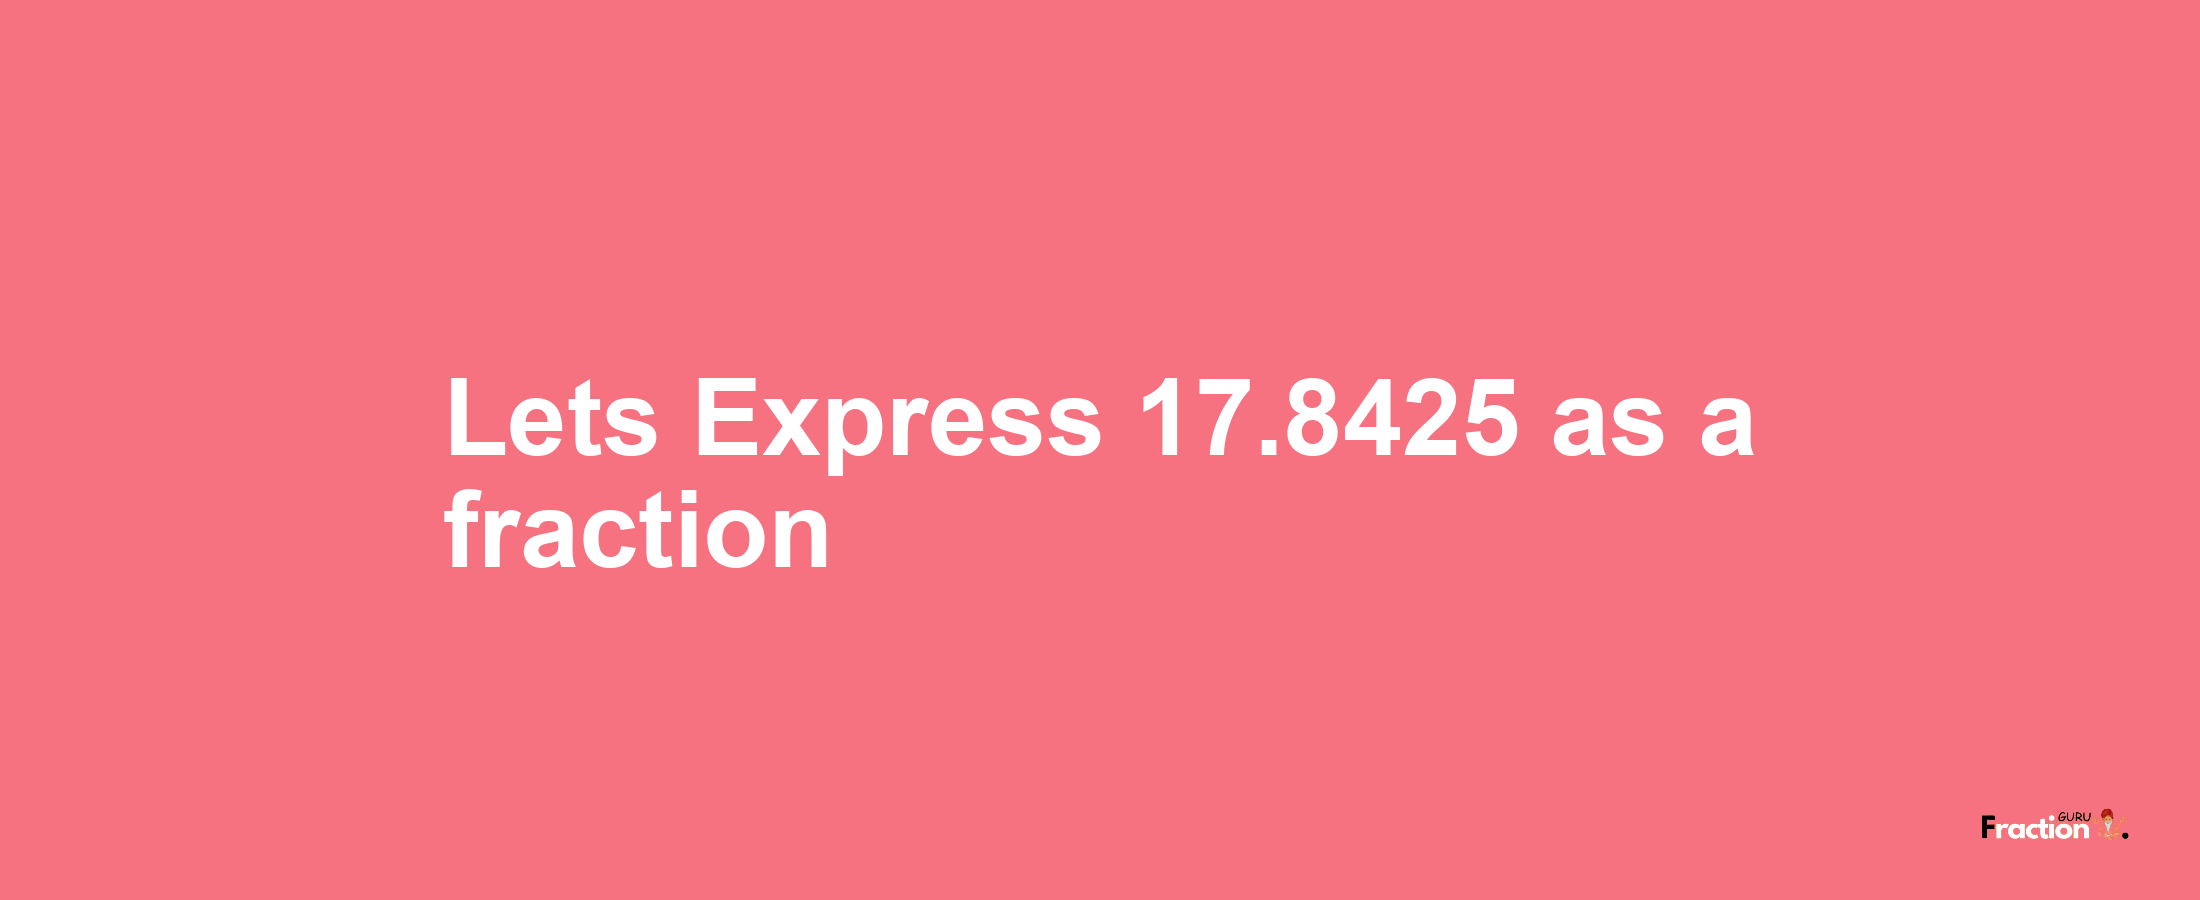 Lets Express 17.8425 as afraction